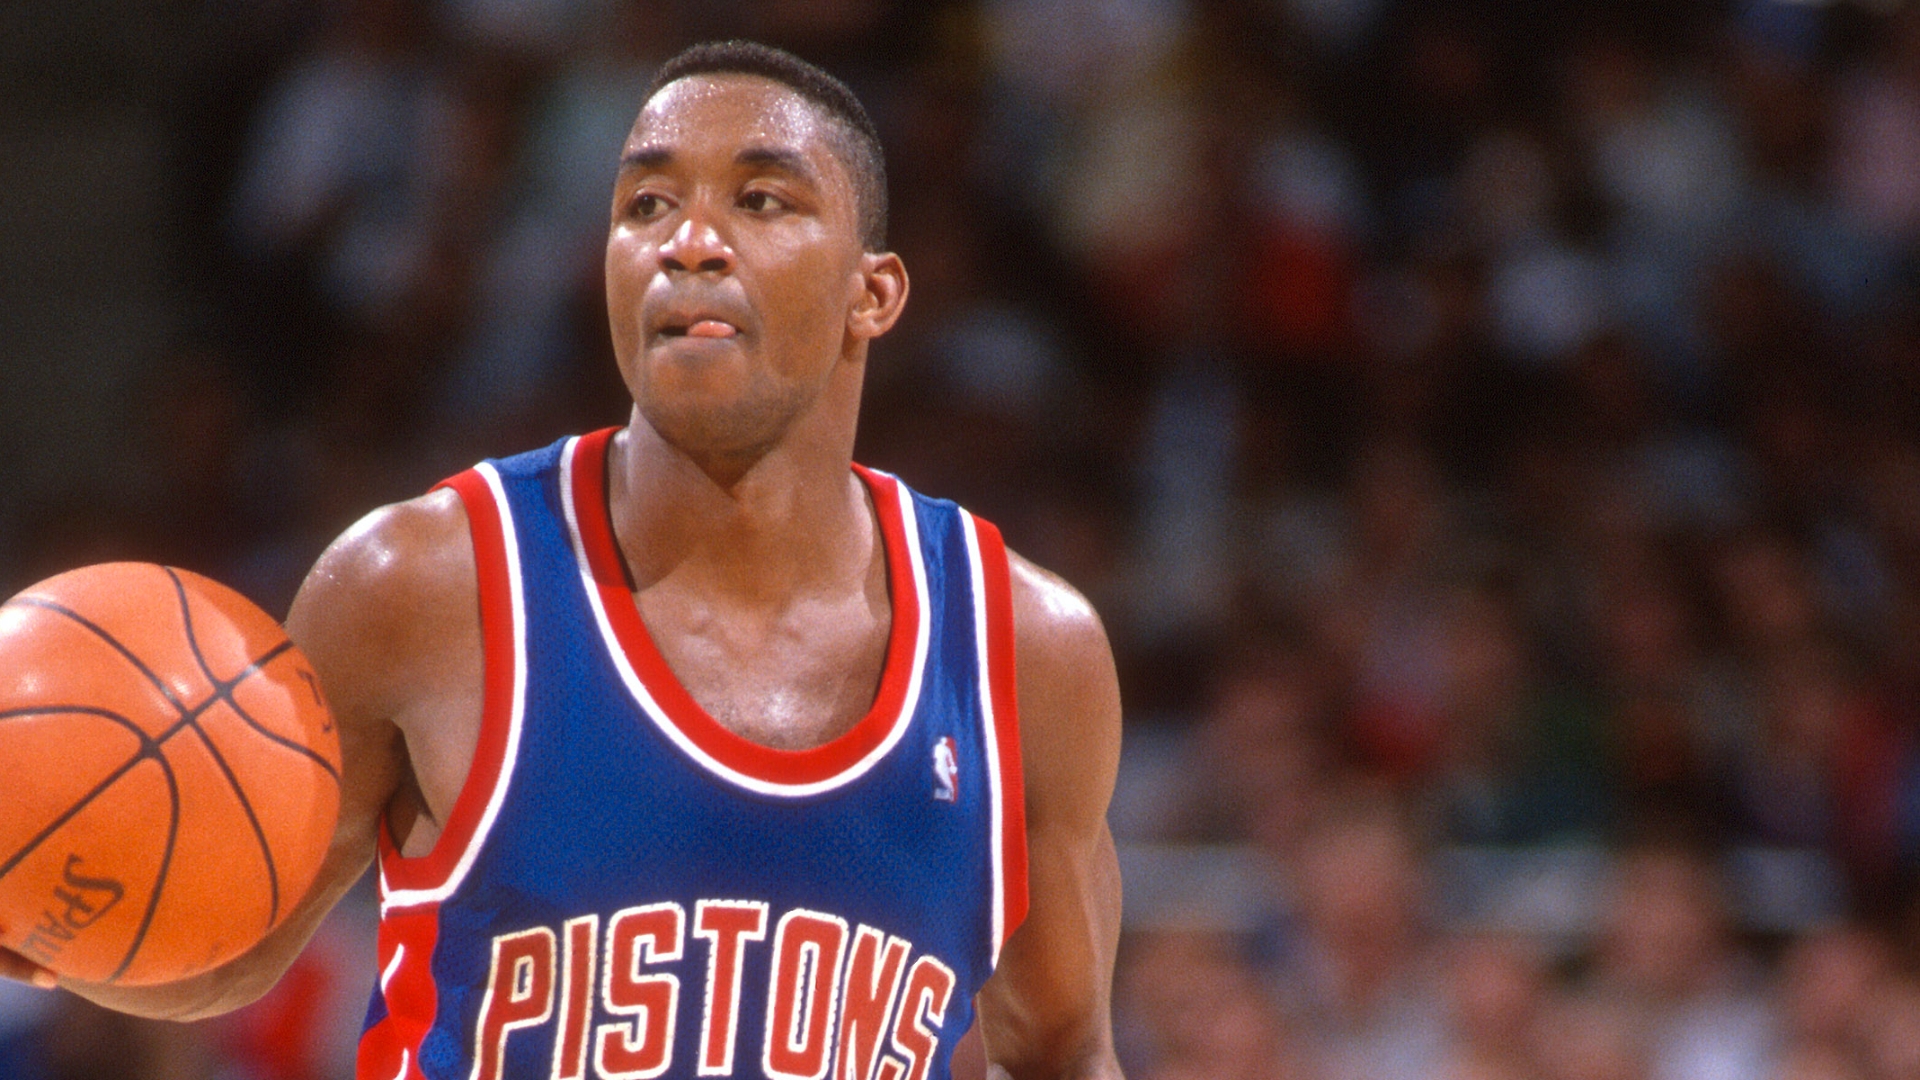 Who is to blame for Isiah Thomas being left off the Dream Team? Watch